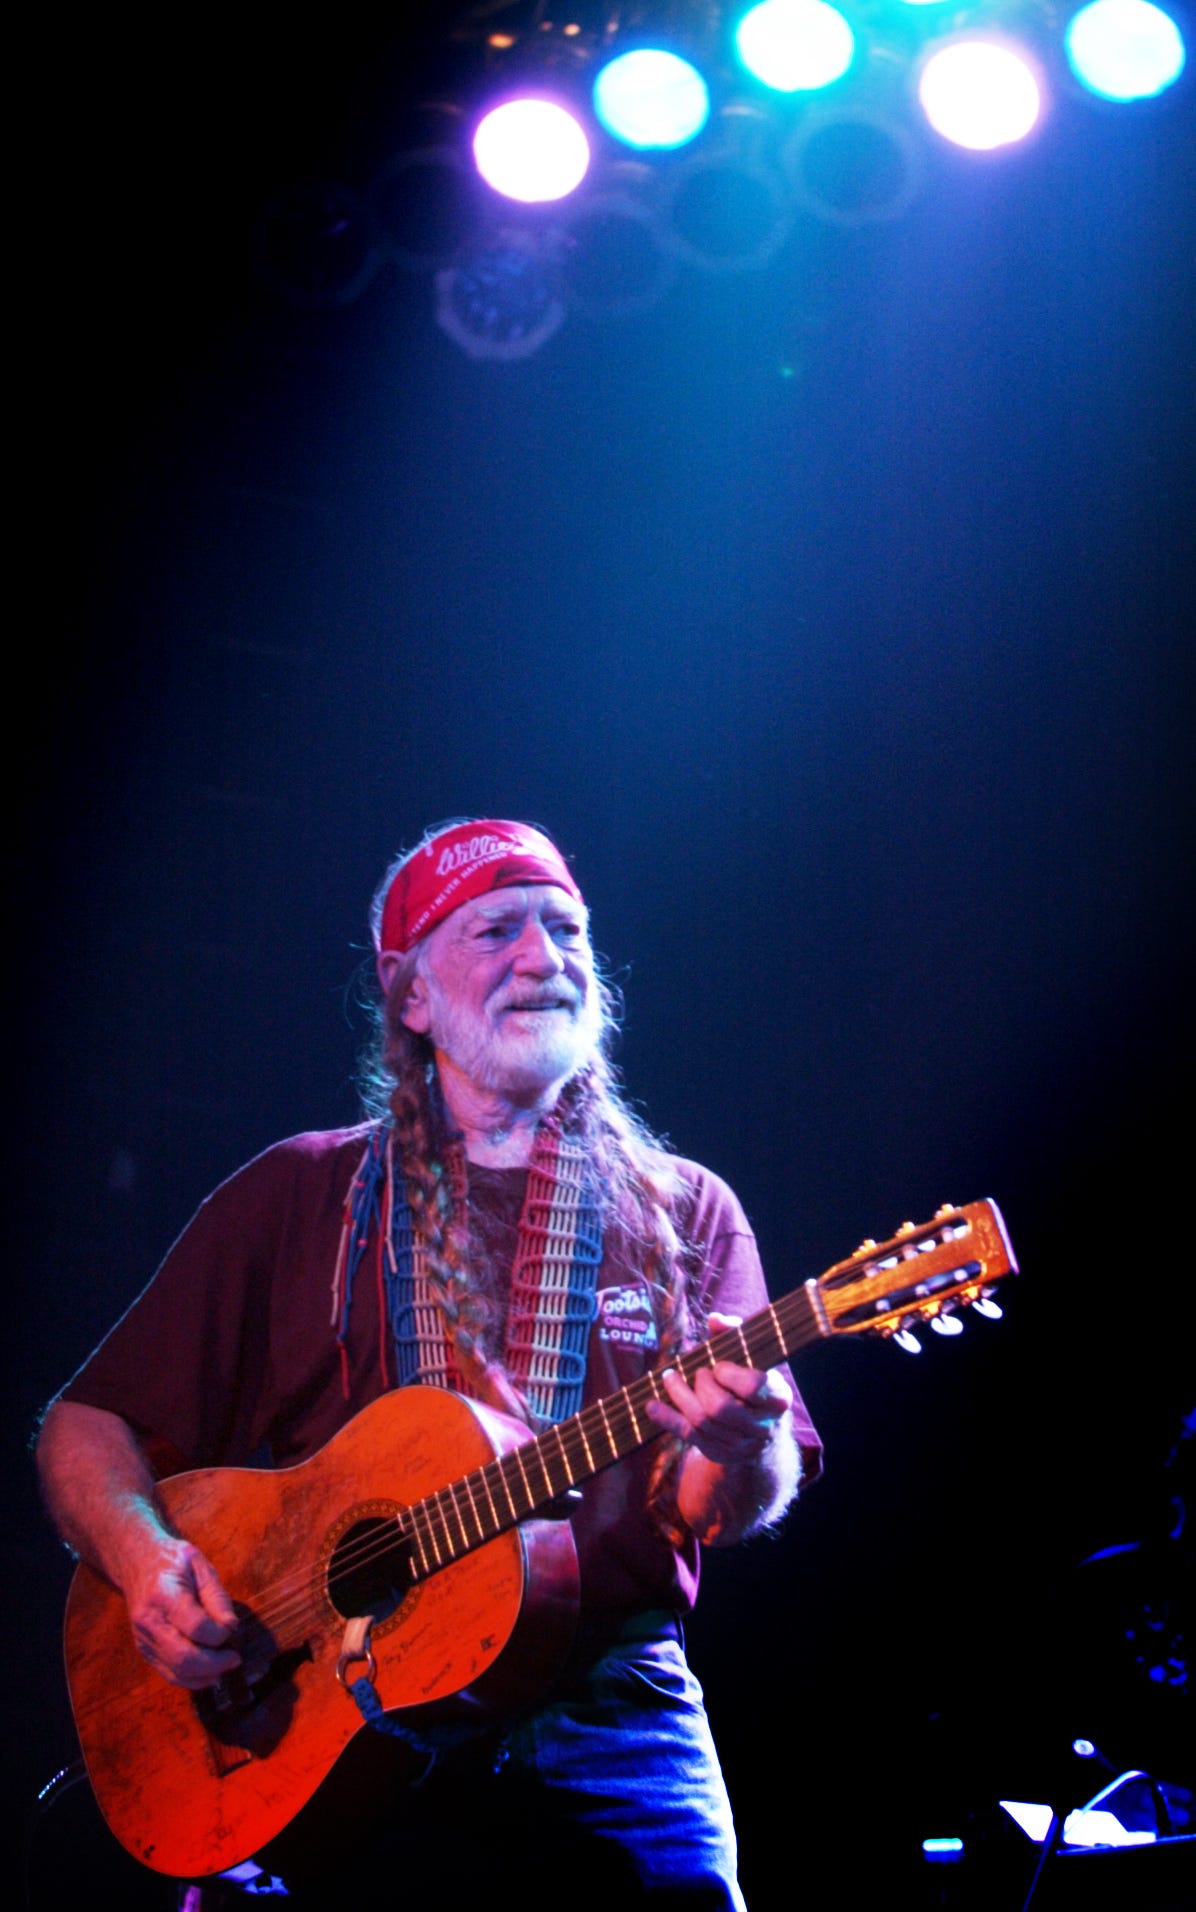 Willie Nelson performs at Willie Nelson's Tsunami Relief Concert at the Austin Music Hall on Sunday January 9, 2005.